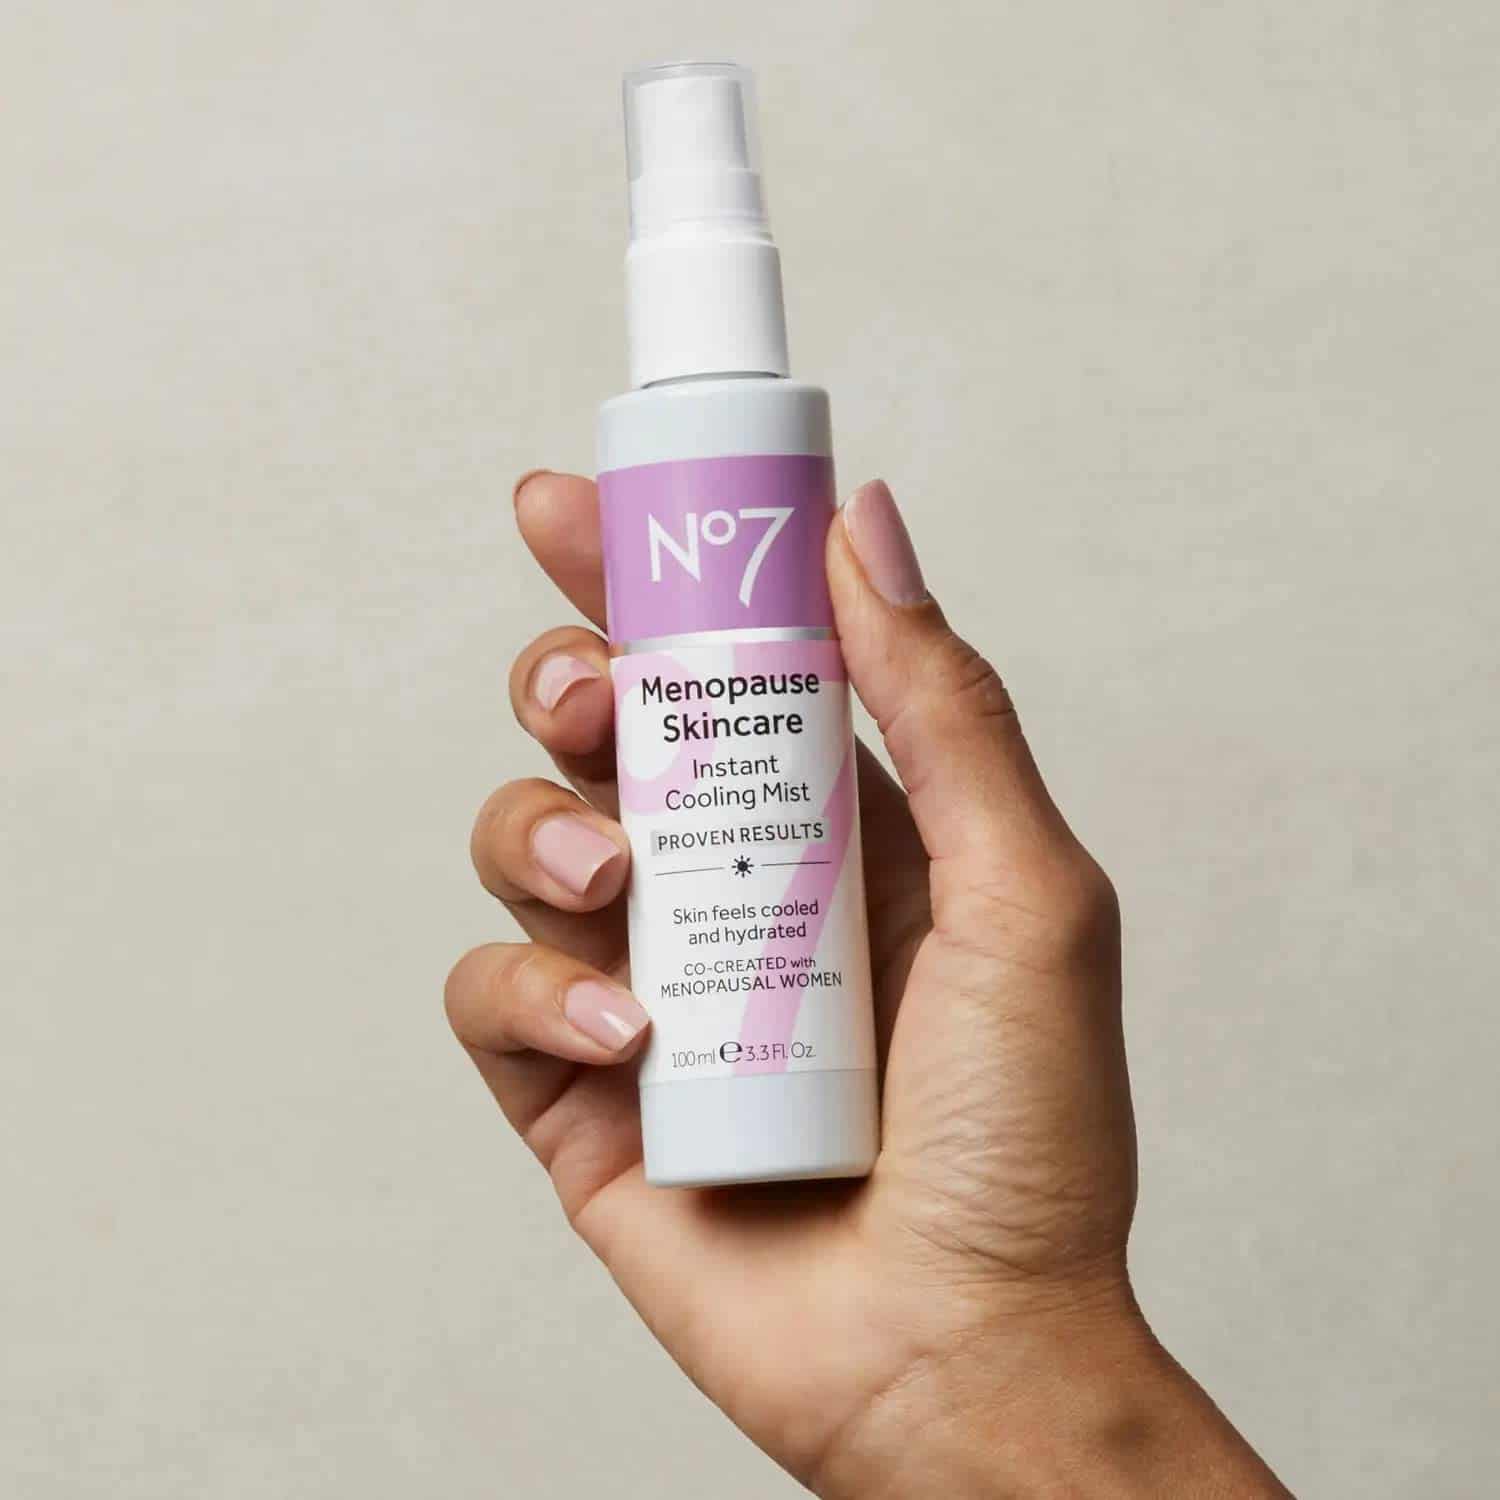 No7 Menopause Skincare Instant Cooling Mist 